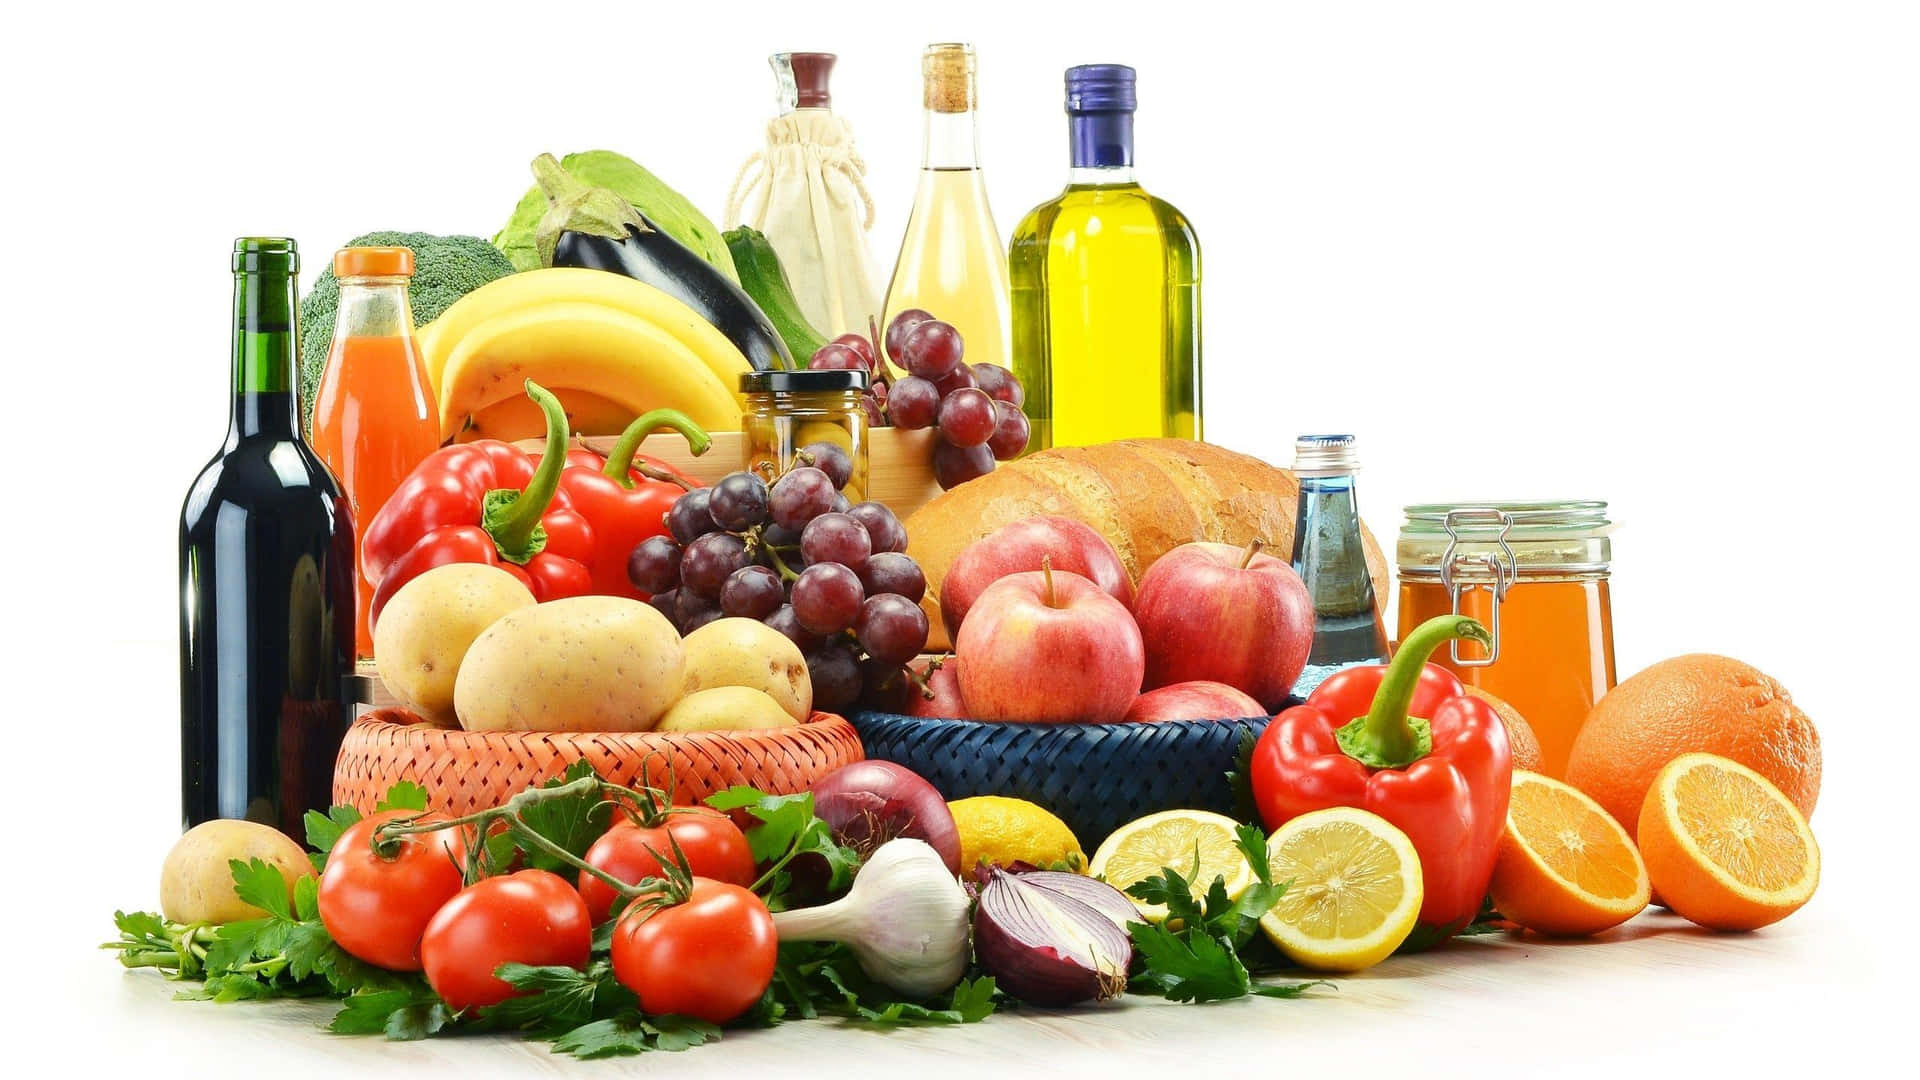 Healthy Food Ingredients For Cooking Picture